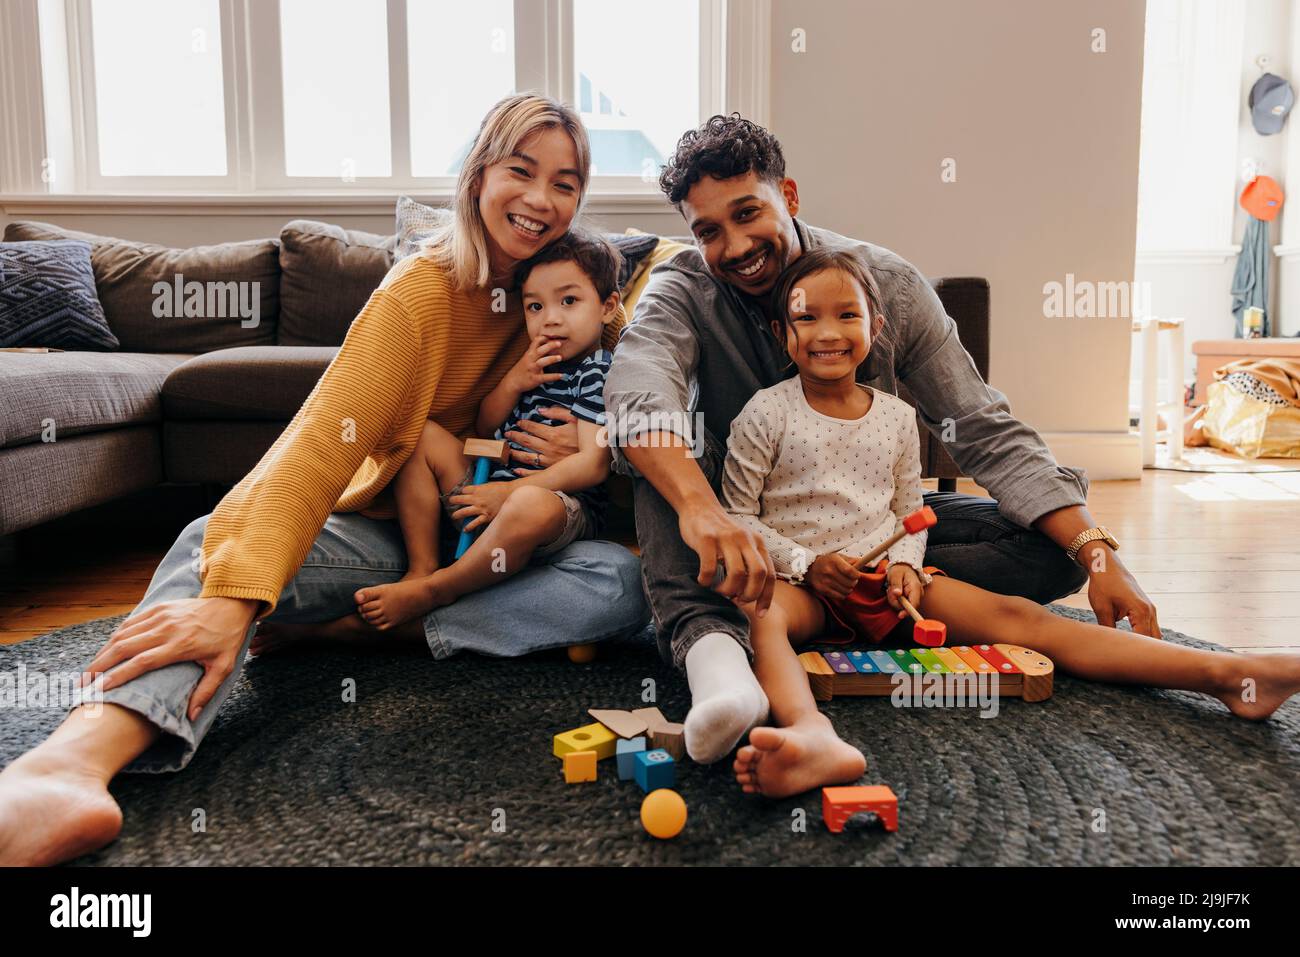 Young family smiling happily in their living room at home. Two loving parents sitting with their son and daughter during playtime. Family of four spen Stock Photo